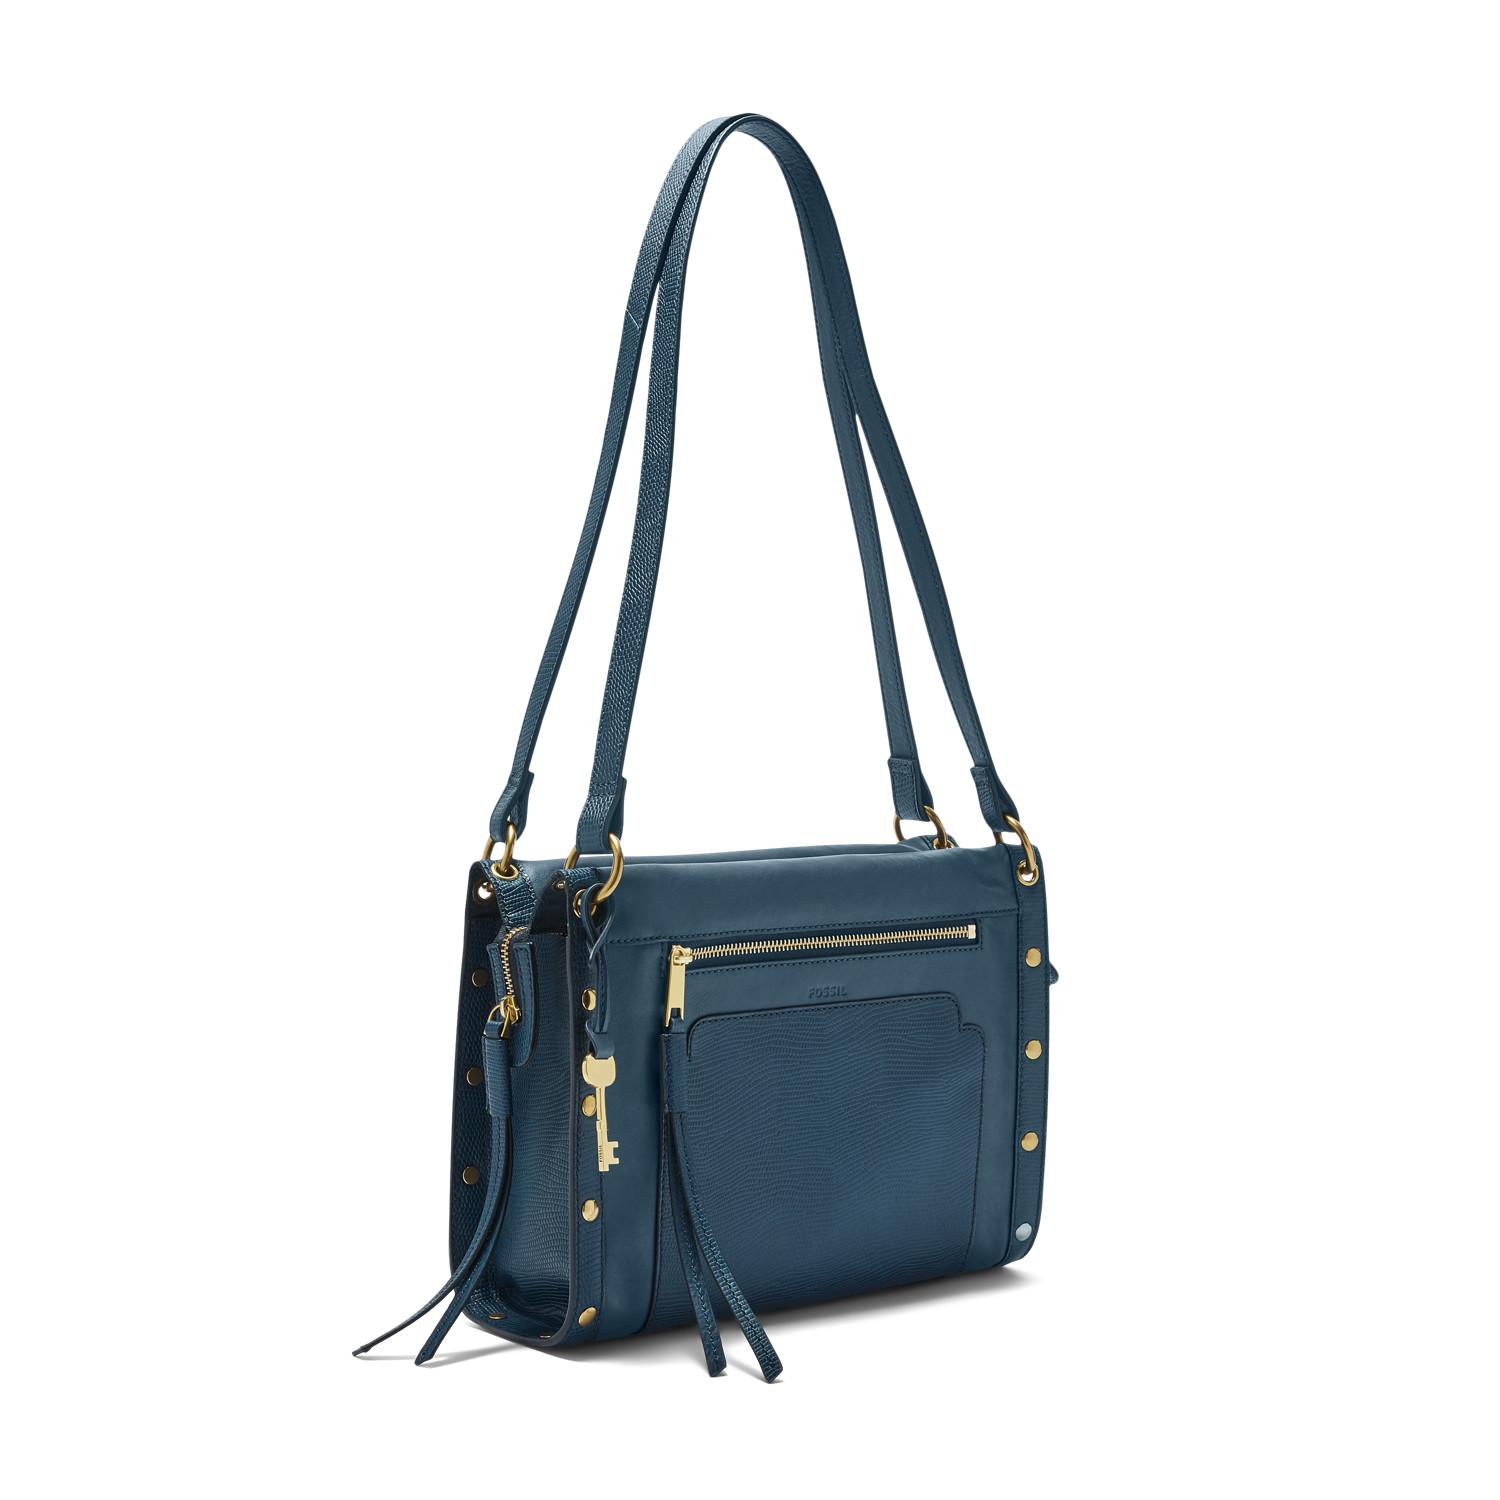 Fossil Leather Allie Satchel Handbags Twilight in Blue - Save 40% - Lyst